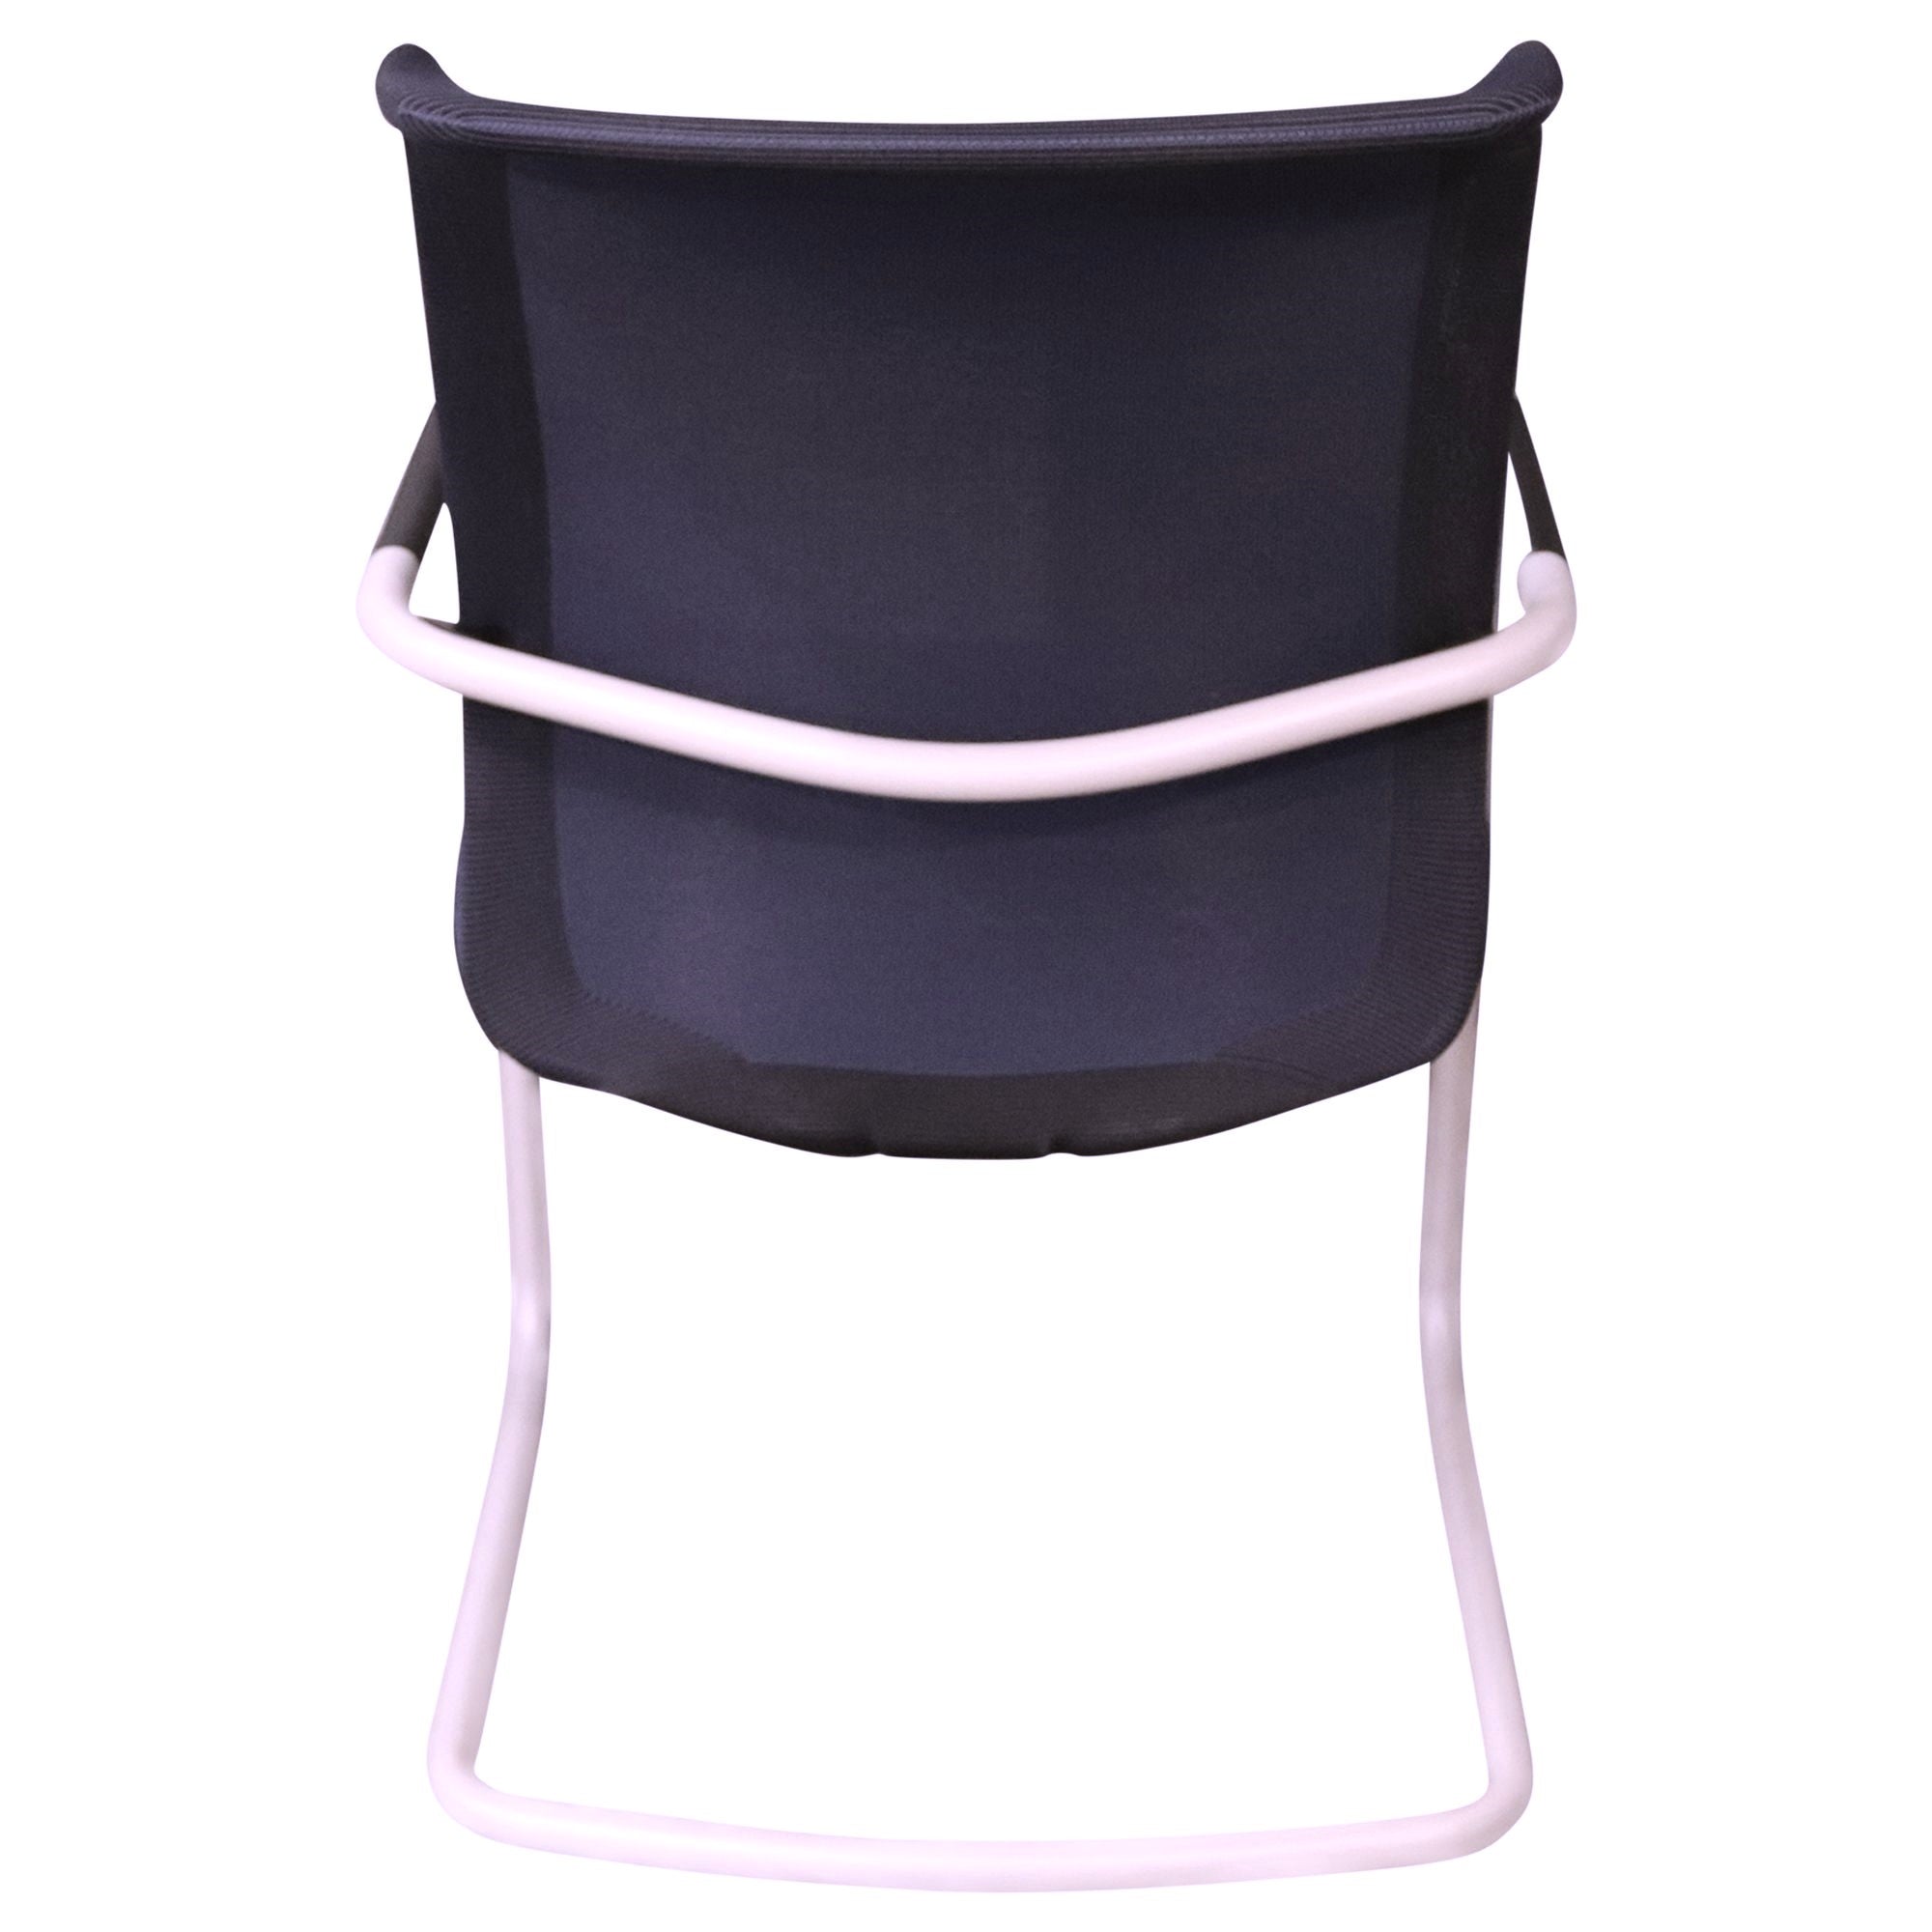 Nienkamper Sled Base Side Chair, Midnight Blue Striped Mesh - Preowned